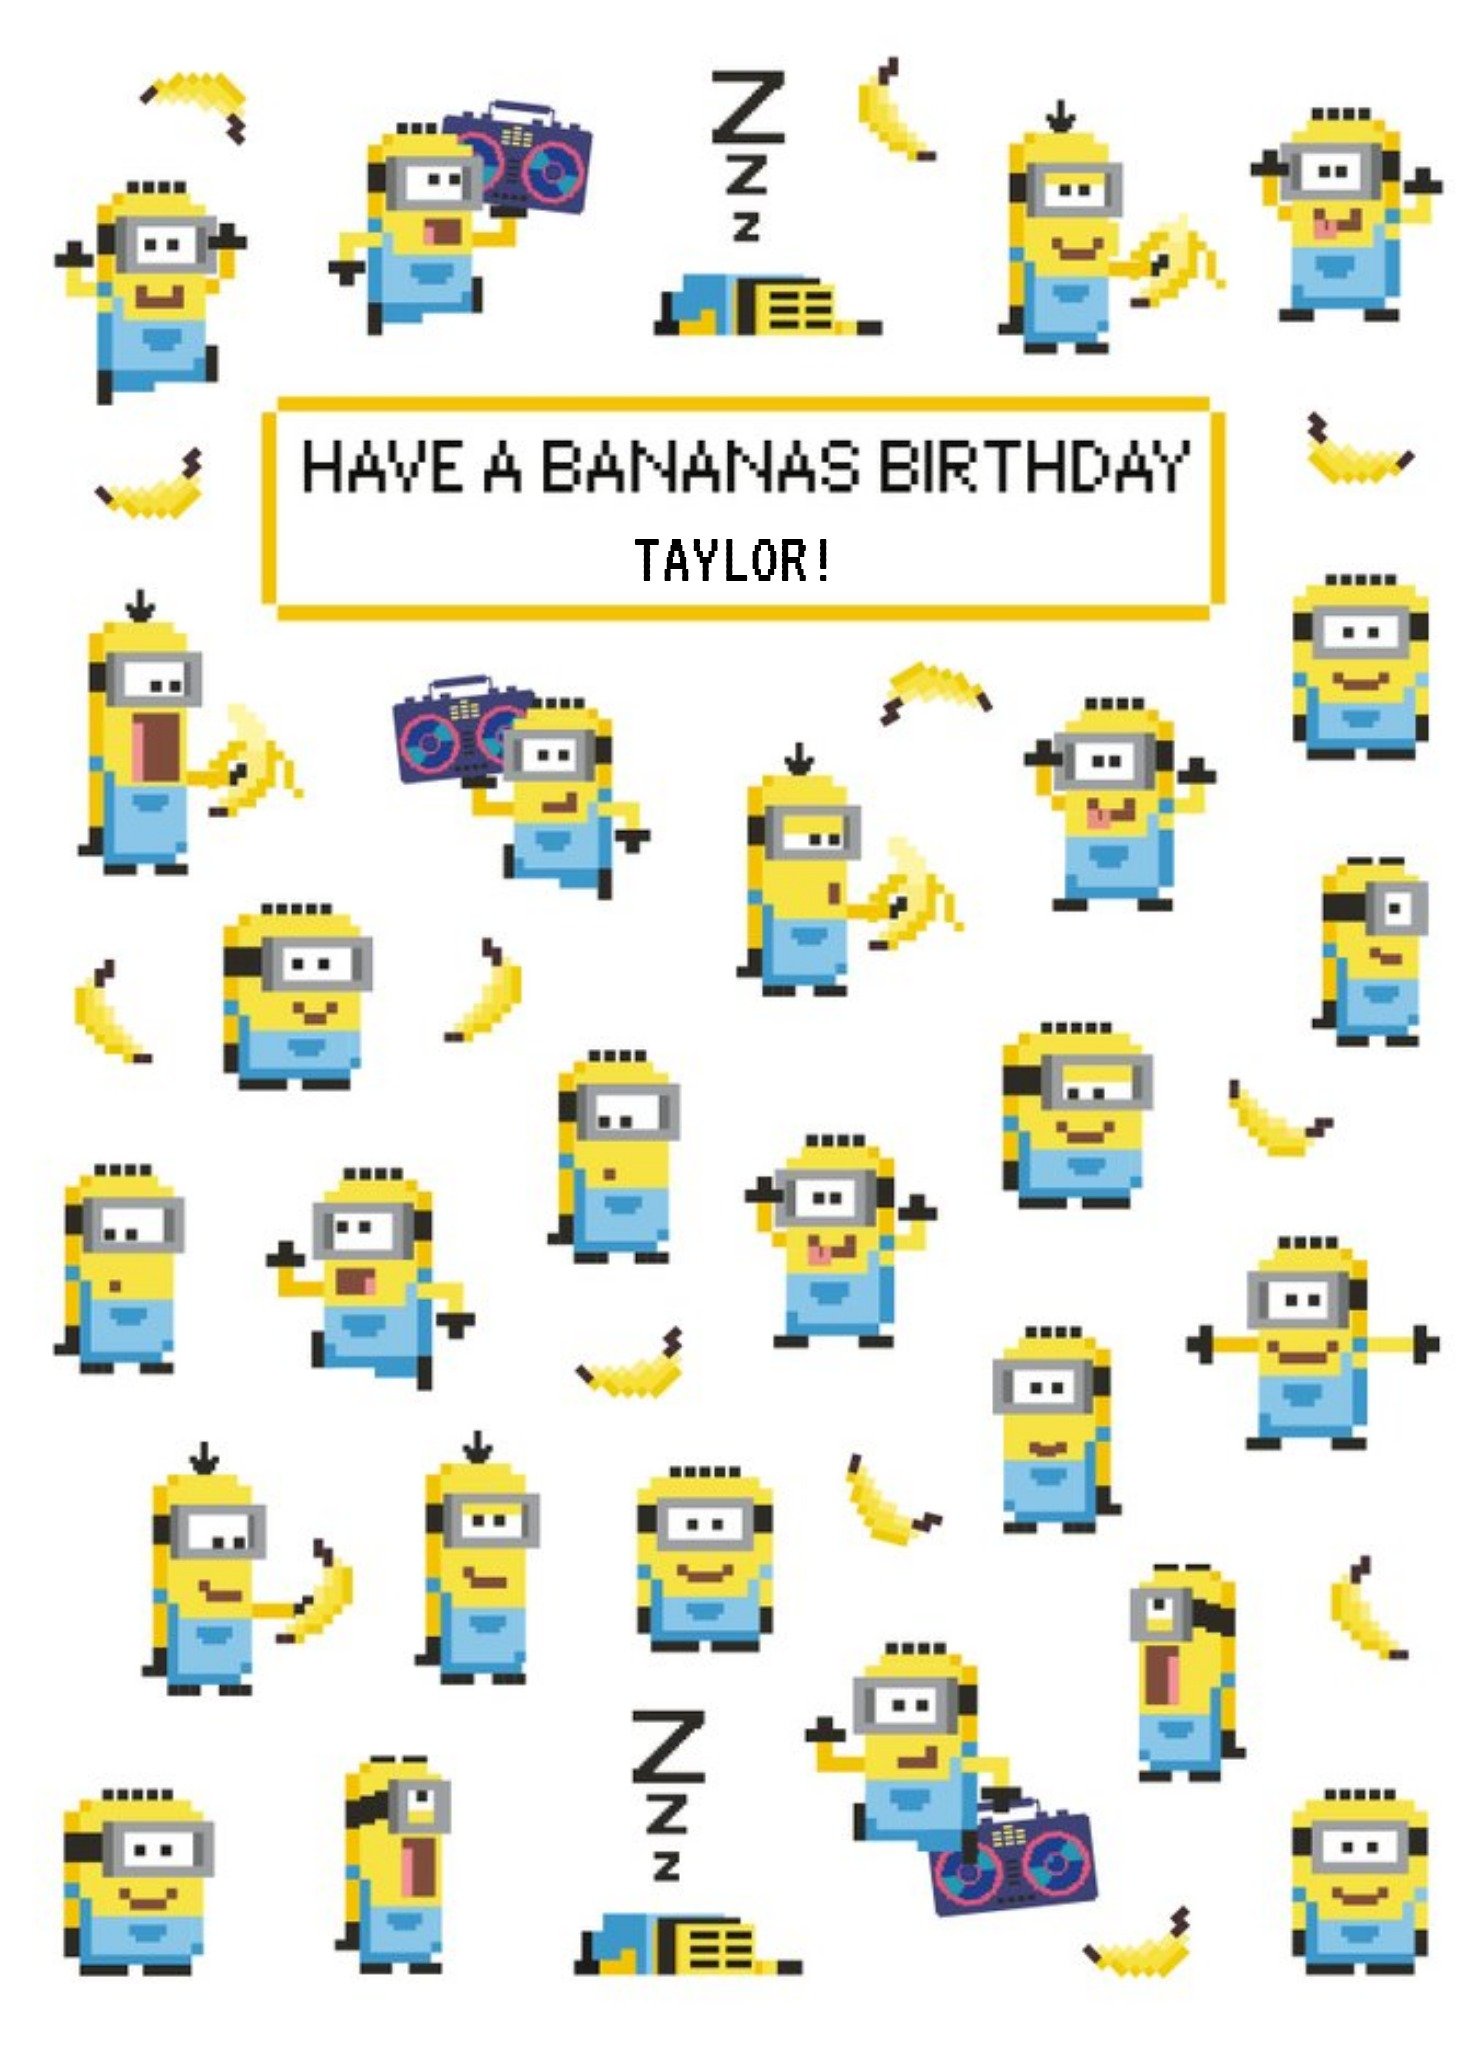 Despicable Me Pixelated Minions Birthday Card Have A Bananas Birthday, Large